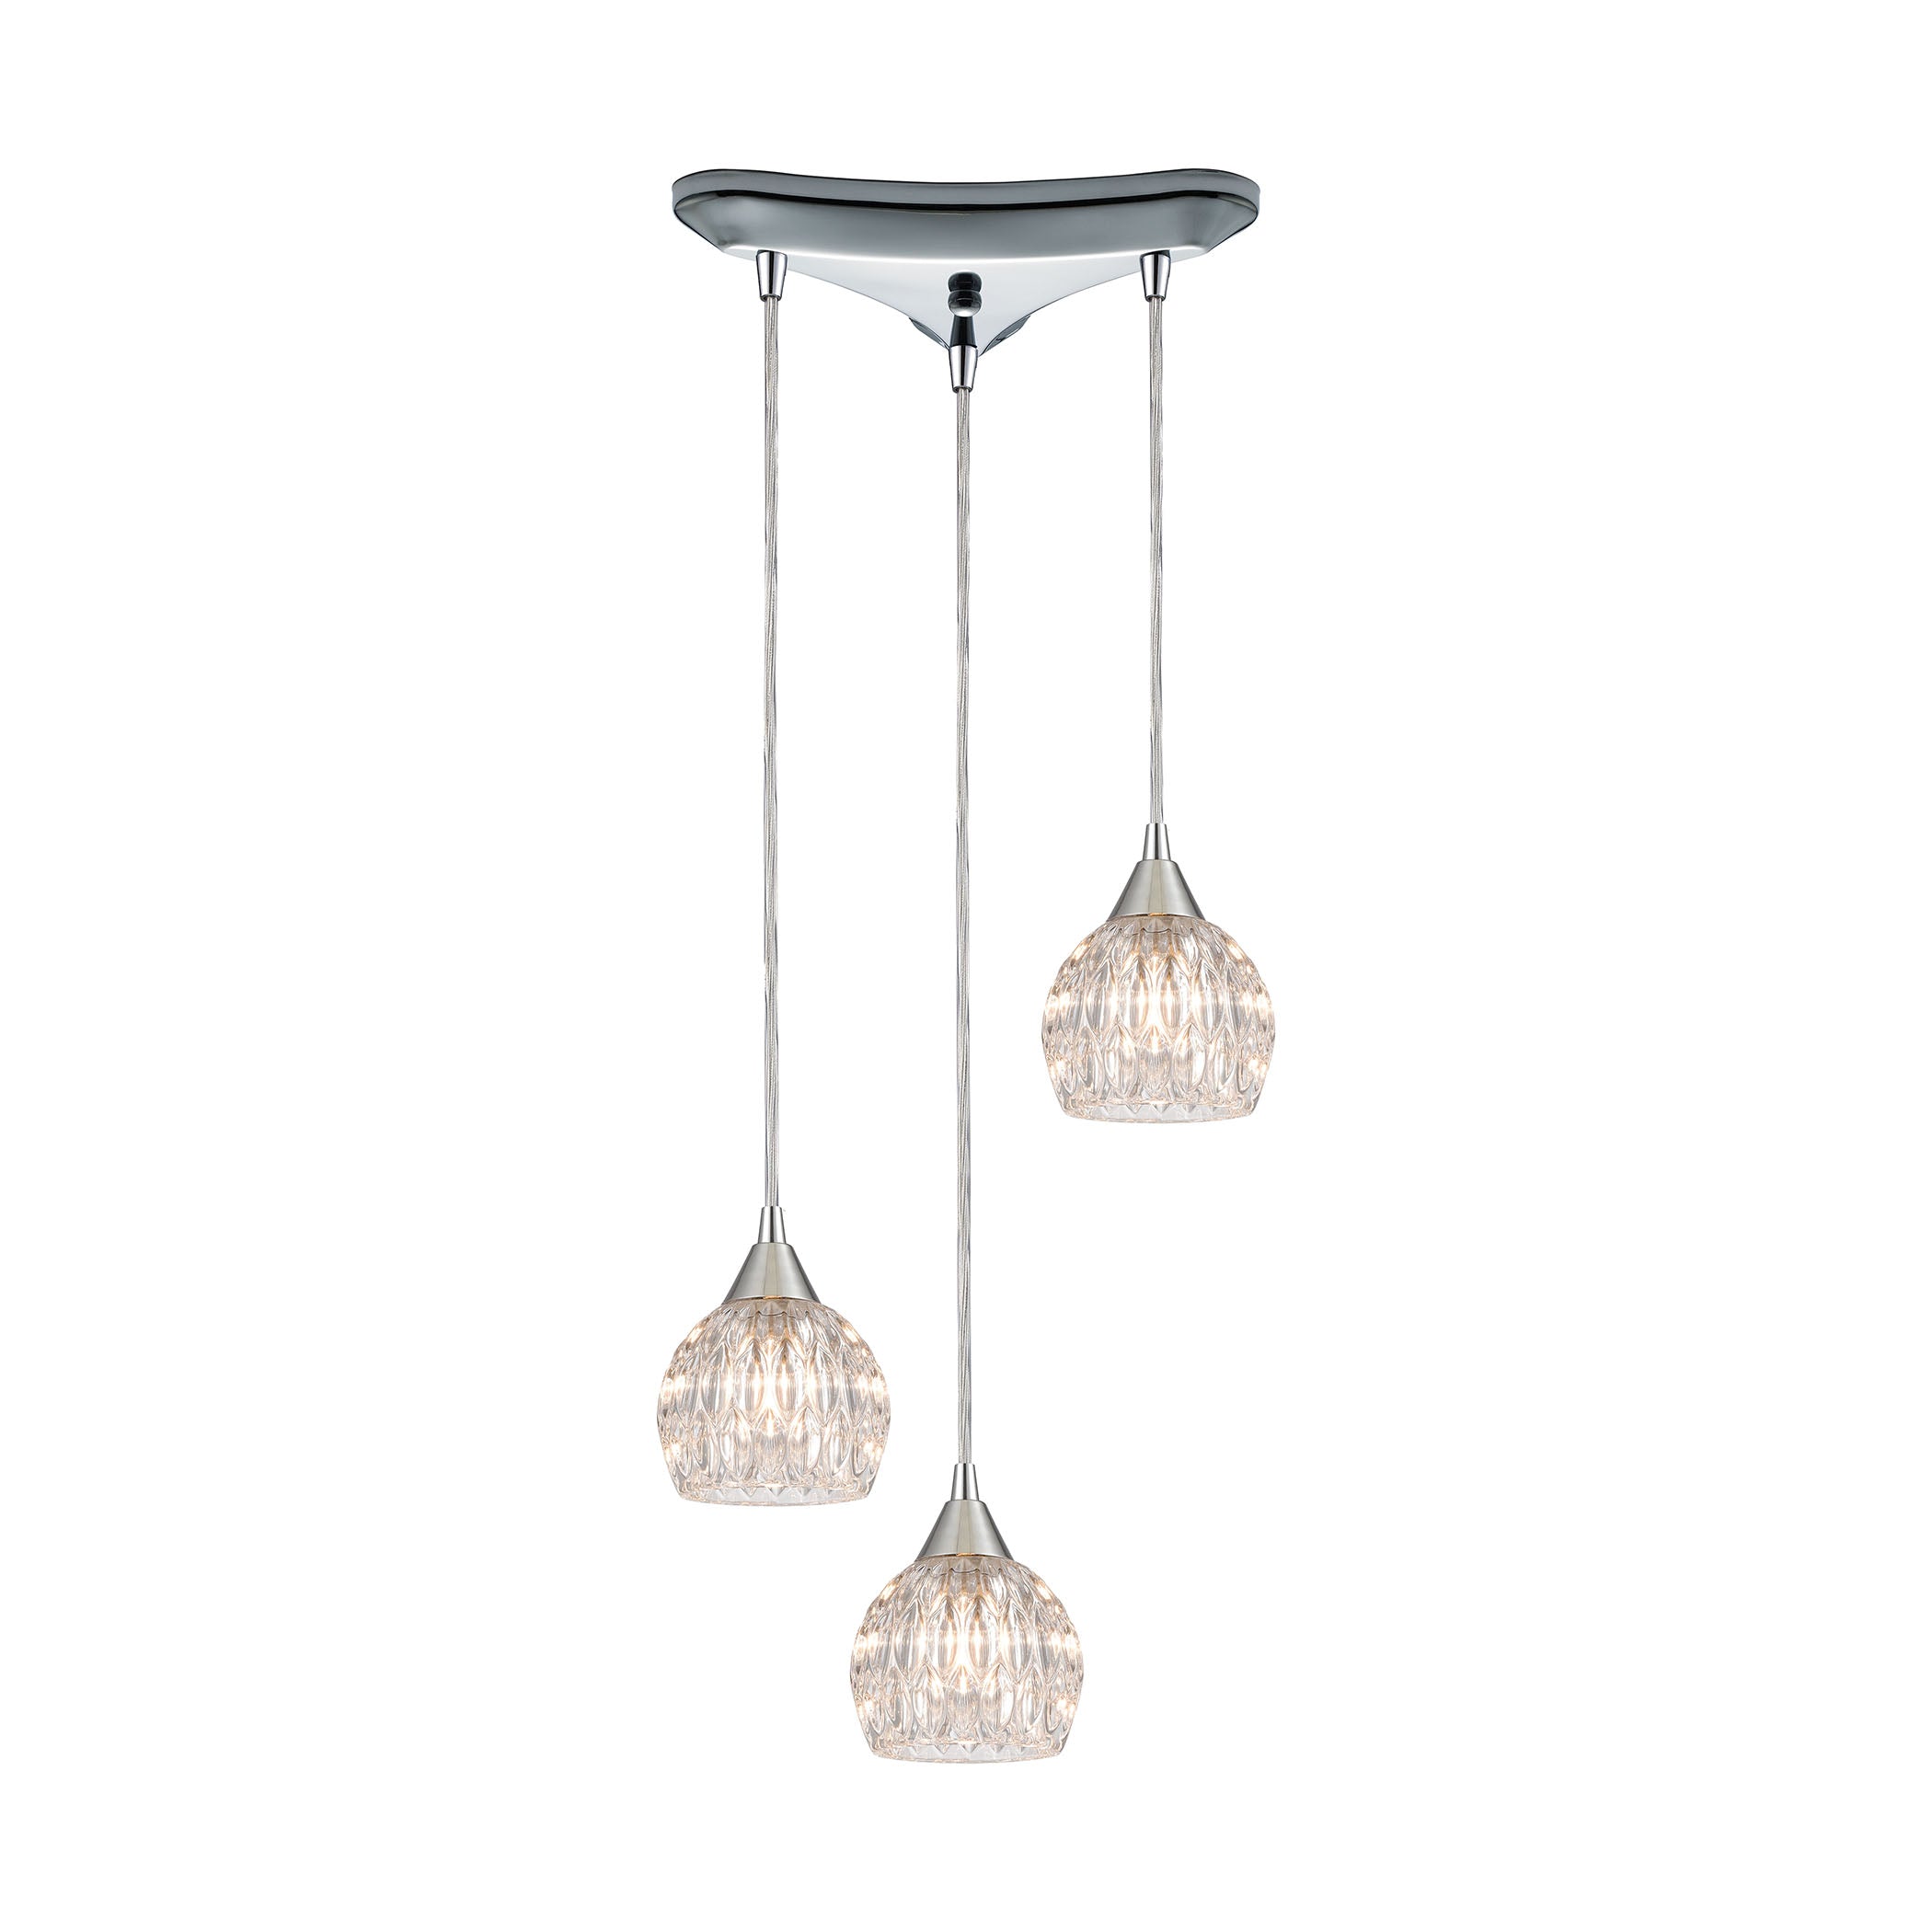 ELK Lighting 10824/3 Kersey 3-Light Triangular Mini Pendant Fixture in Polished Chrome with Clear Crystal